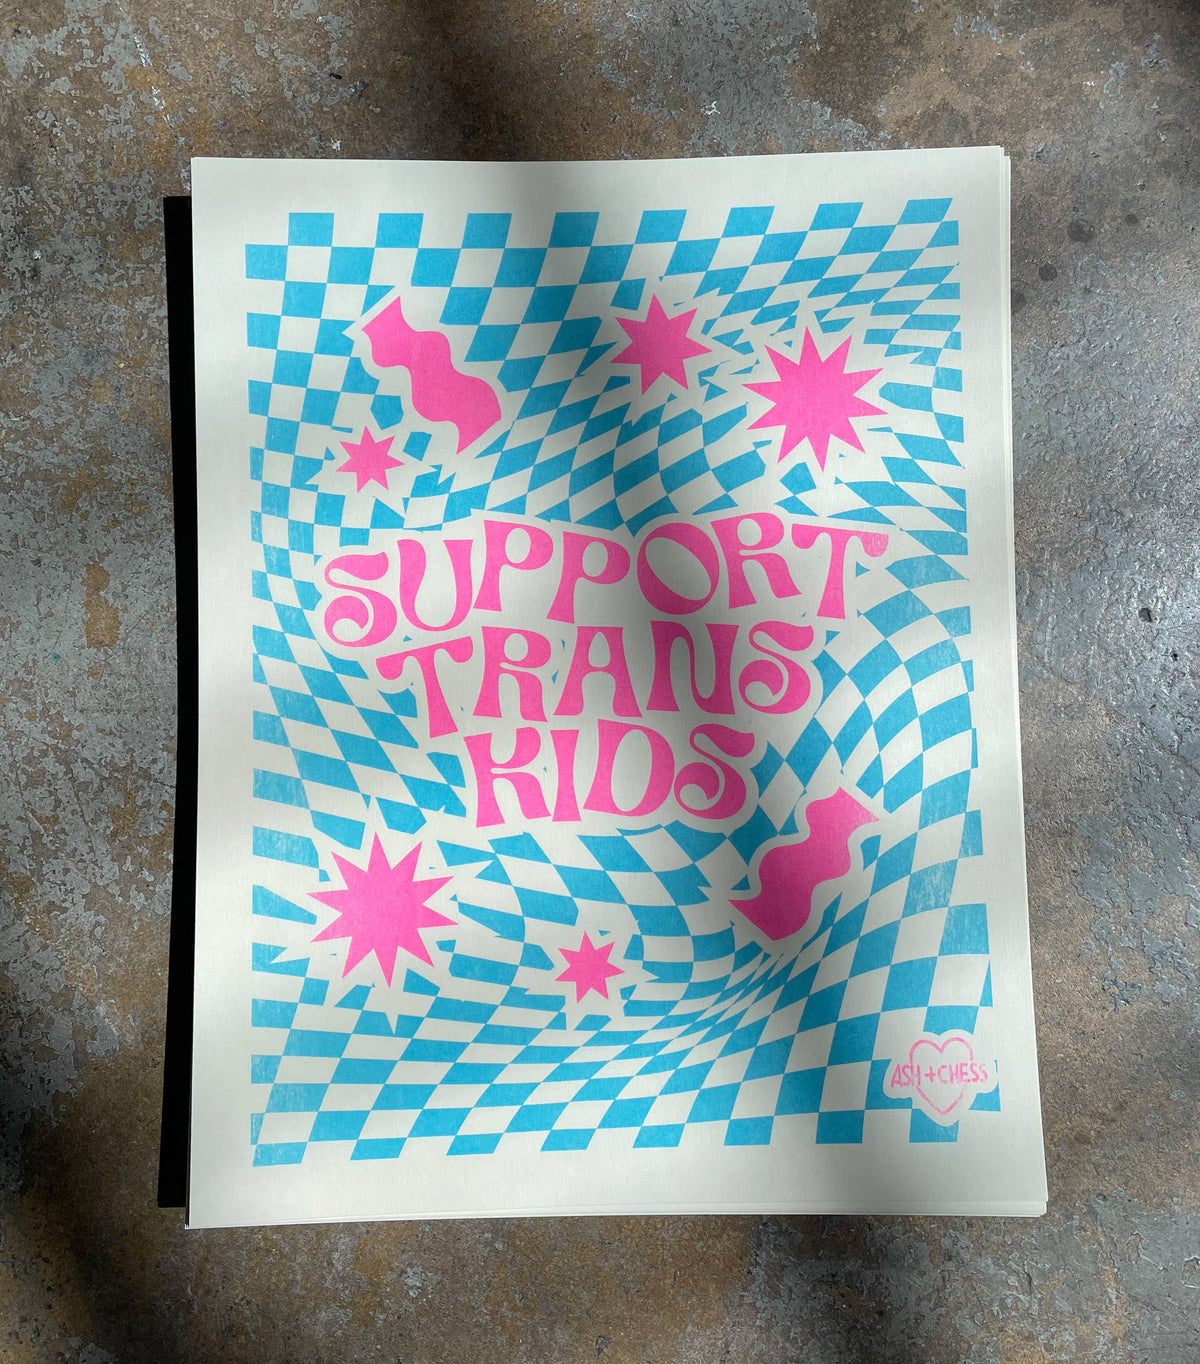 11x14" Support Trans Kids Risograph Print by Ash and Chess.